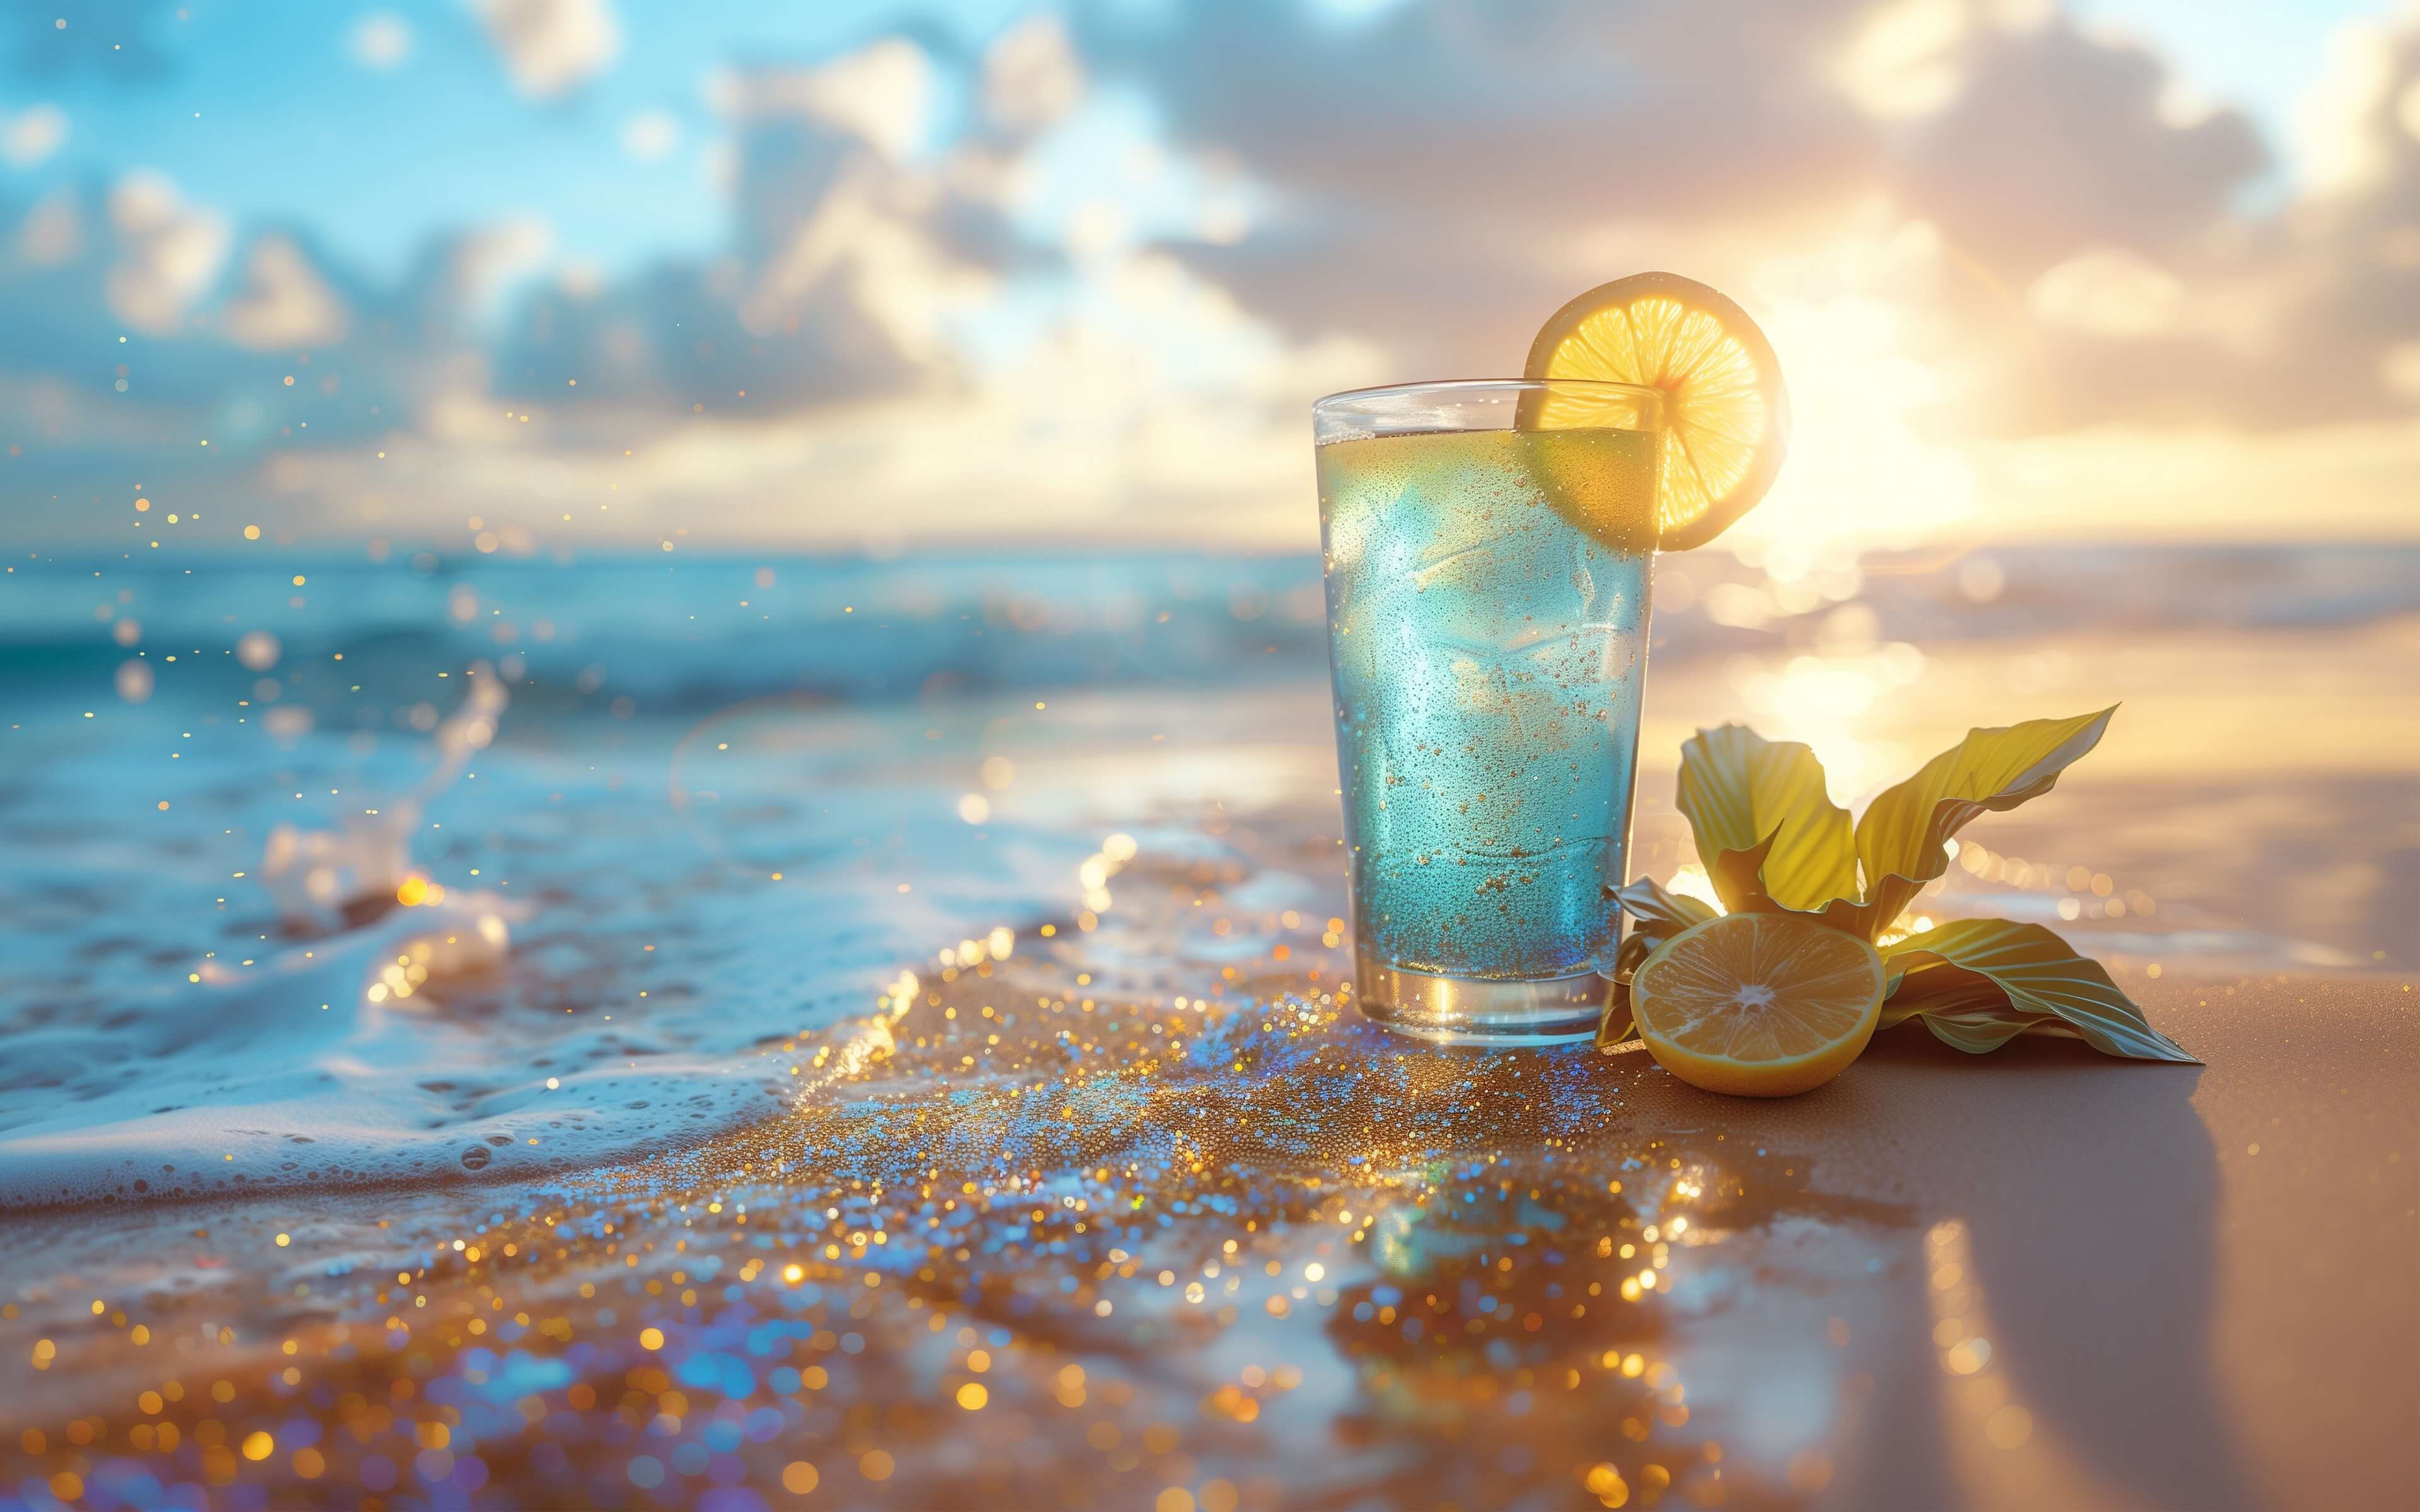 Cold drink on the ocean shore wallpaper 3840x2400